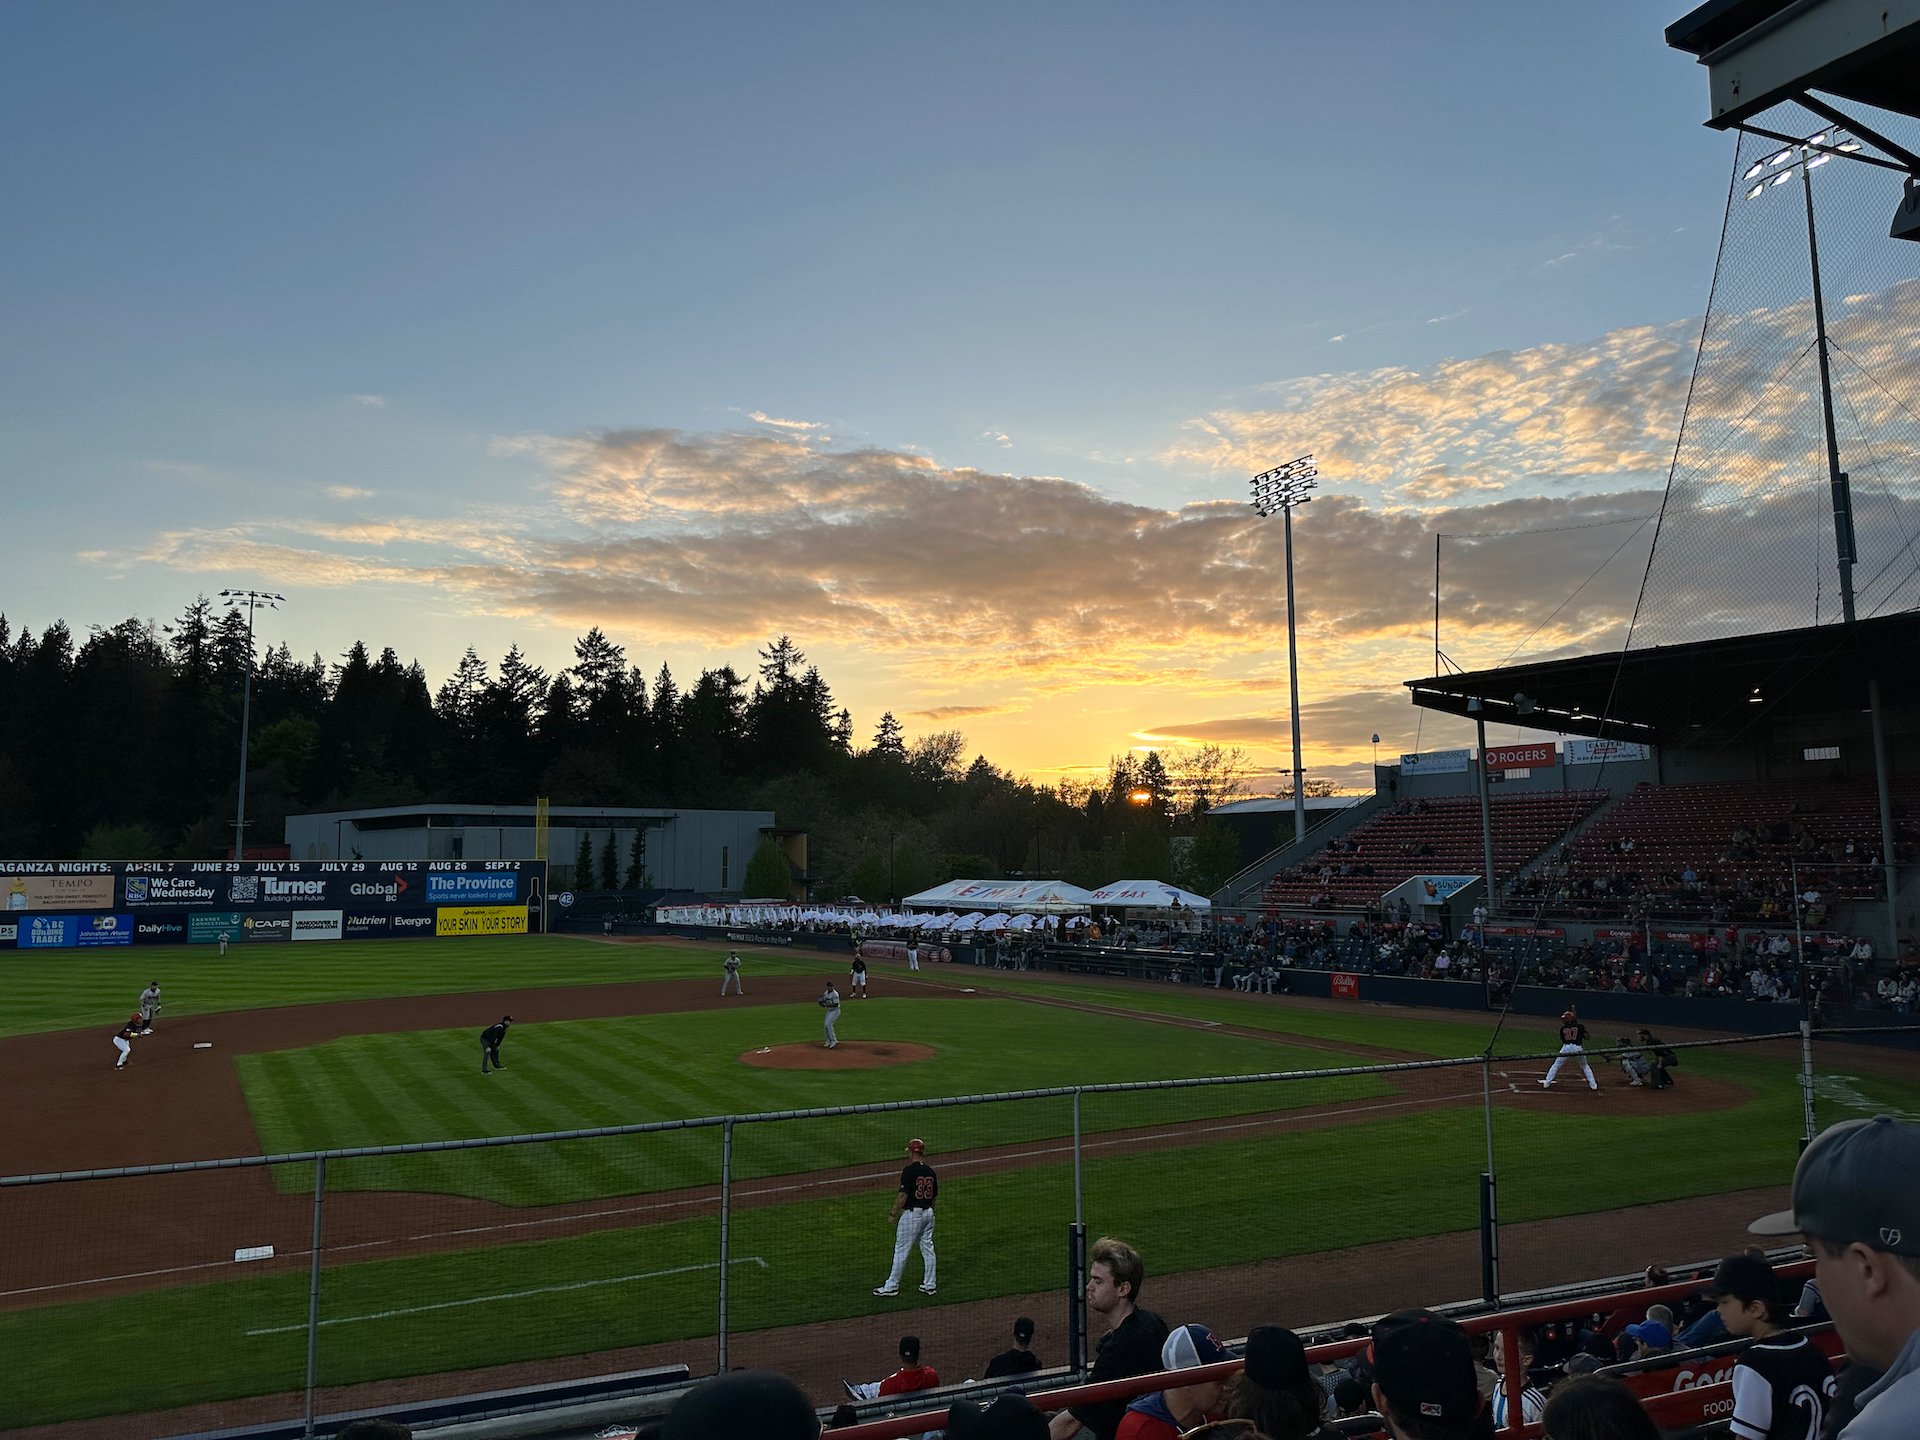  It was a beautiful night for a ballgame. 